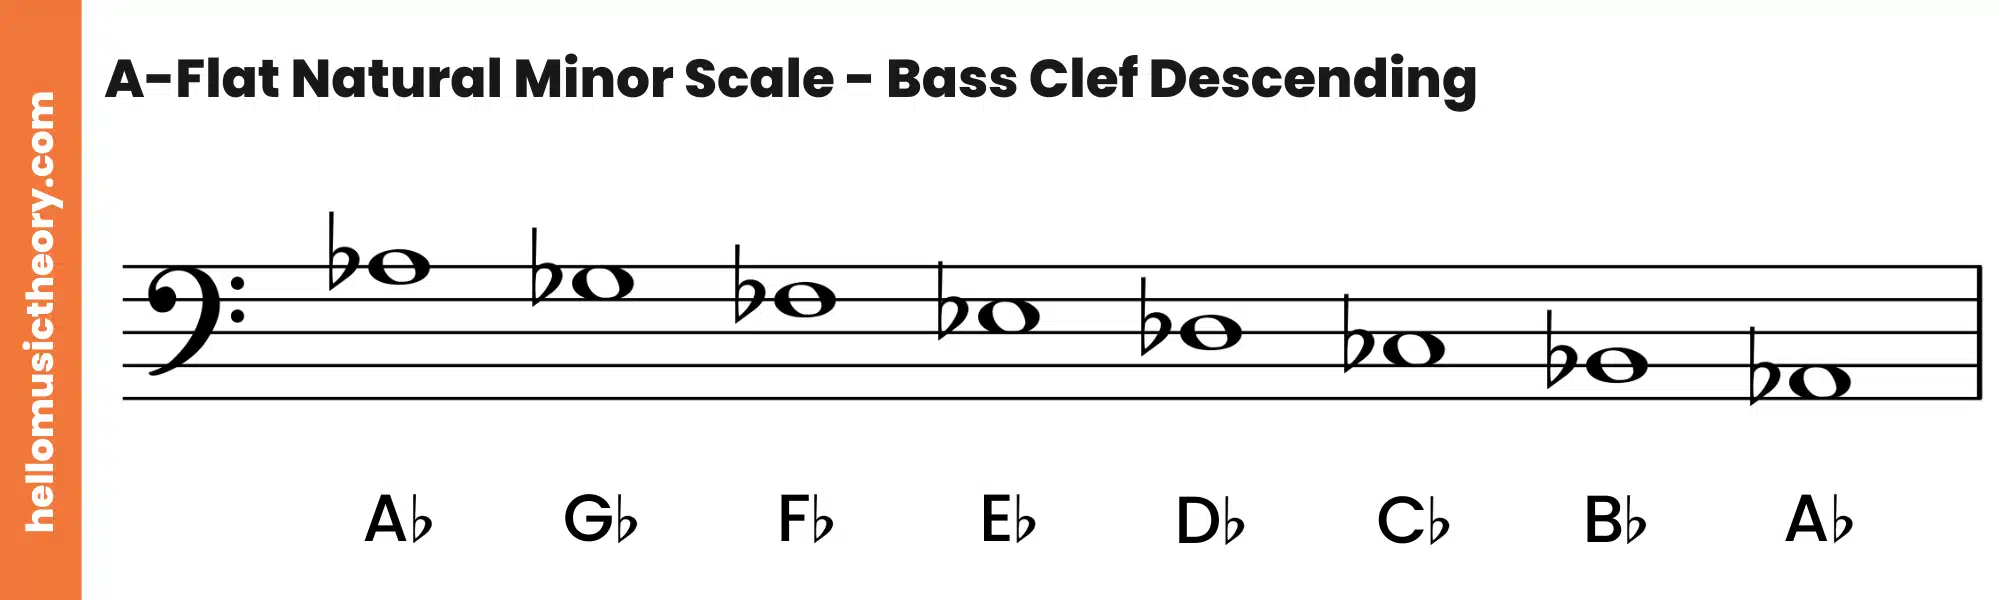 A-Flat Natural Minor Scale Bass Clef Descending